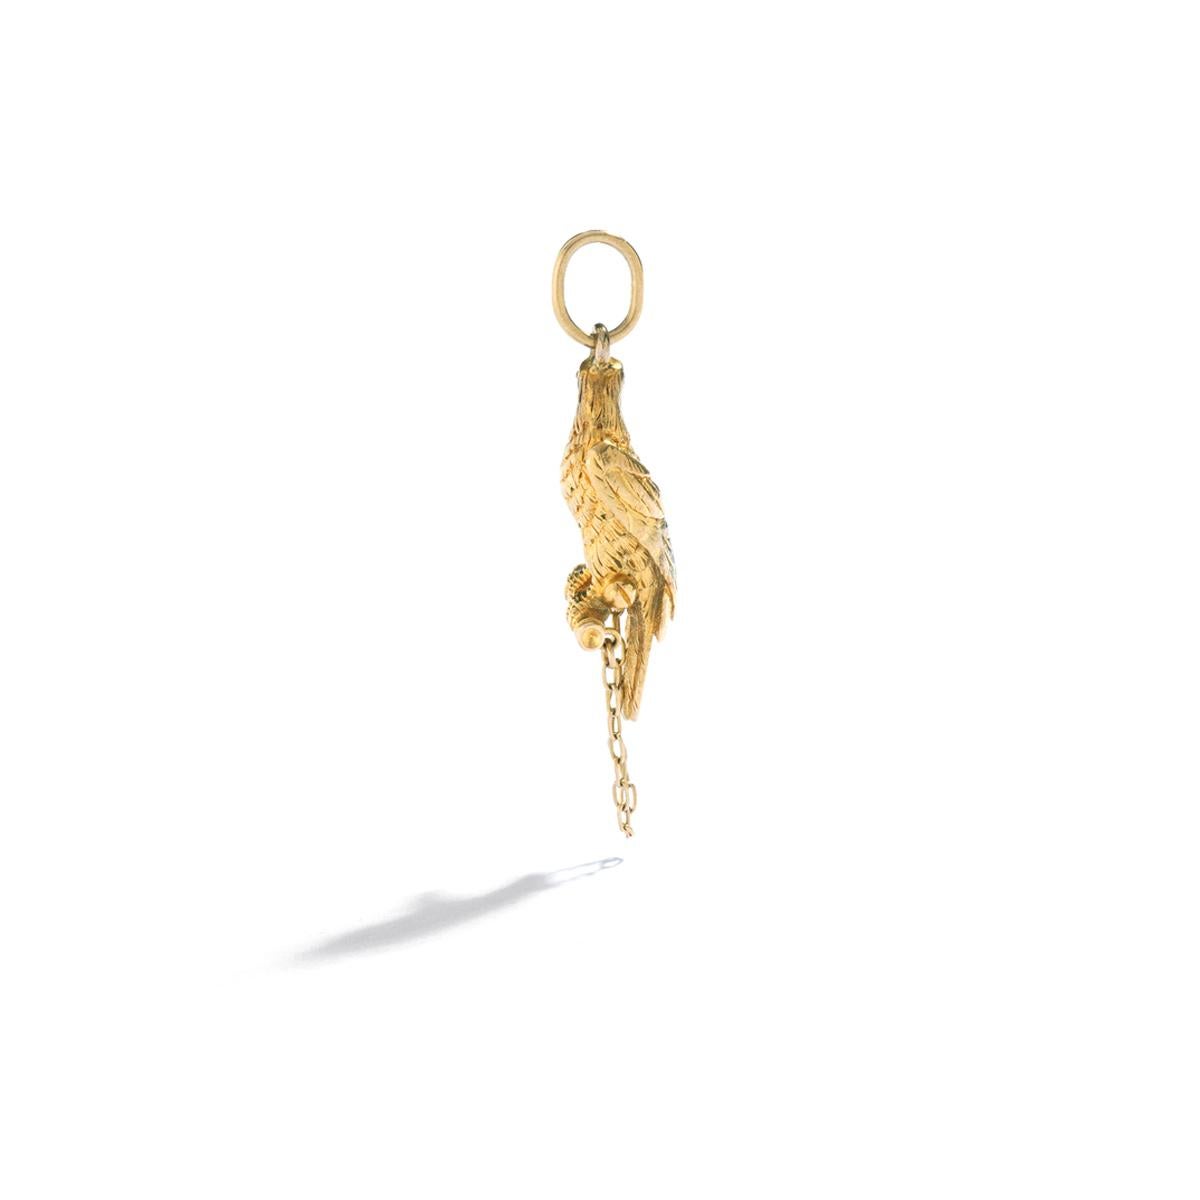 Falcon Yellow Gold 18k Pendant Charm Pendant.

Total length: 1.38 inch (3.50 centimeters) including bail.
Total weight: 8.24 grams